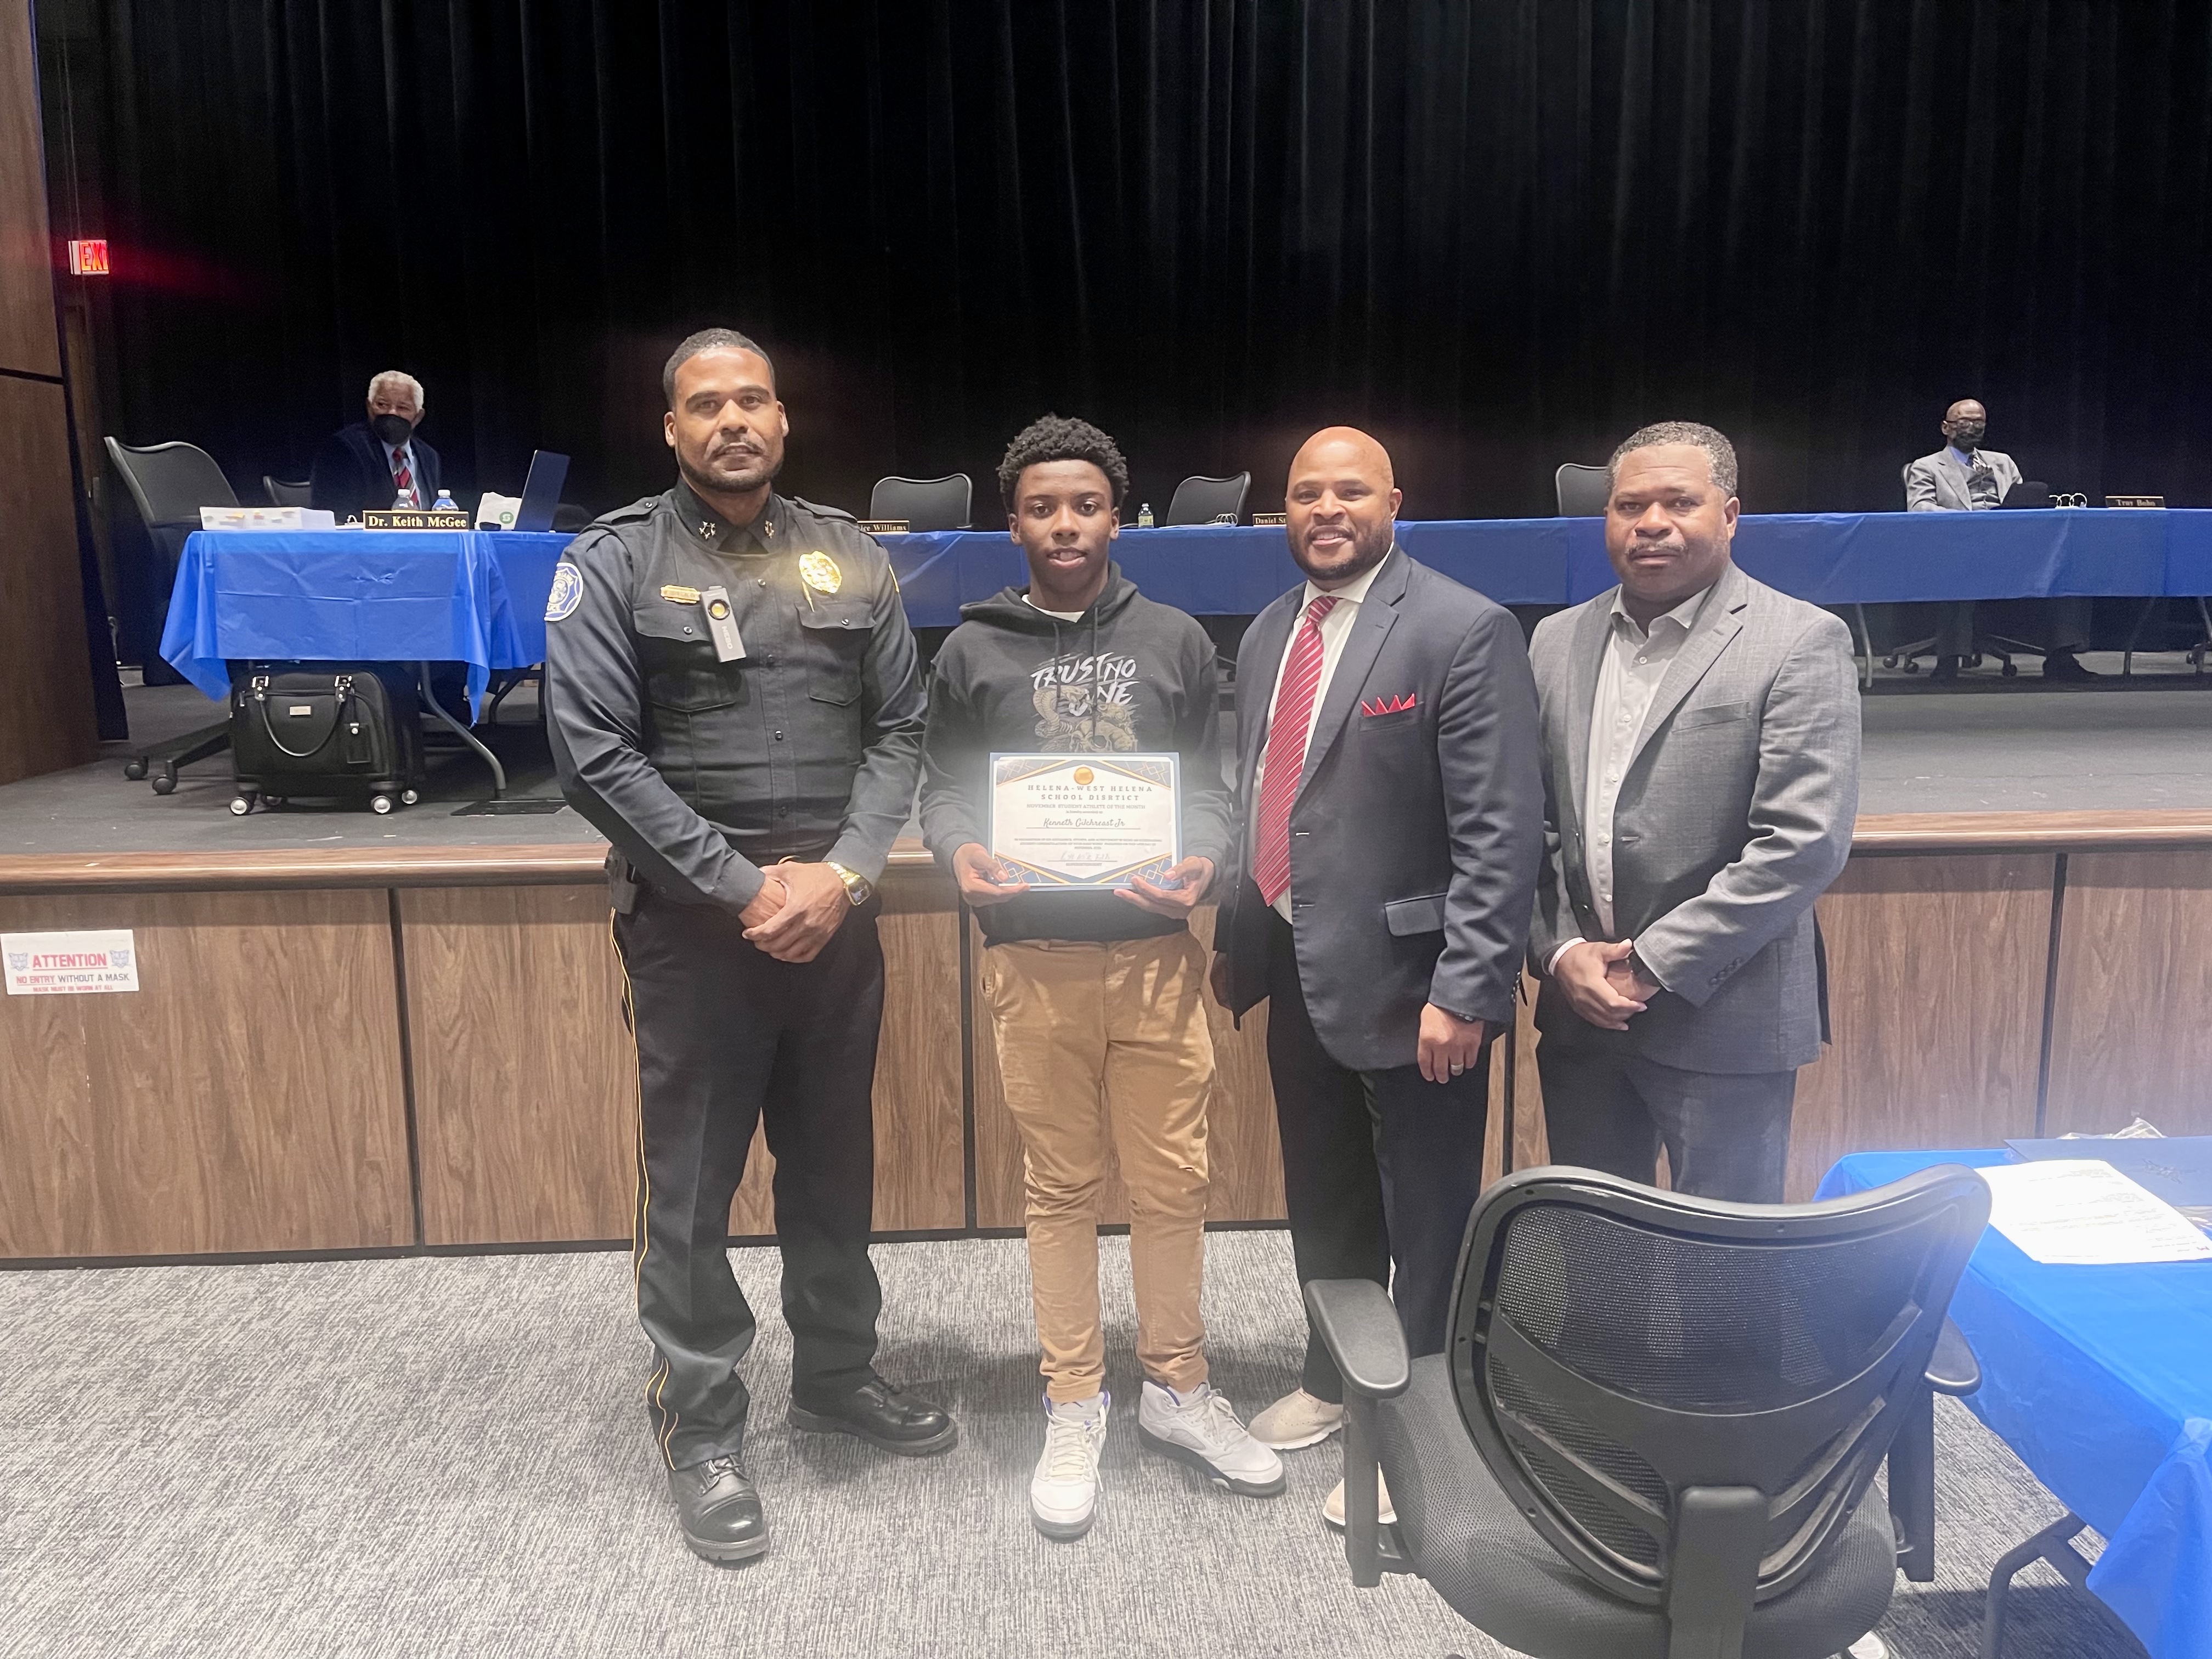 The Jr. High Athlete of the Month is Kenneth Gilchreast Jr. K.J. led our 7th grade football team to an undefeated season. He stepped in when called upon to play quarterback and free safety for the 9th grade team. He led the team in TD passes and completion rating.